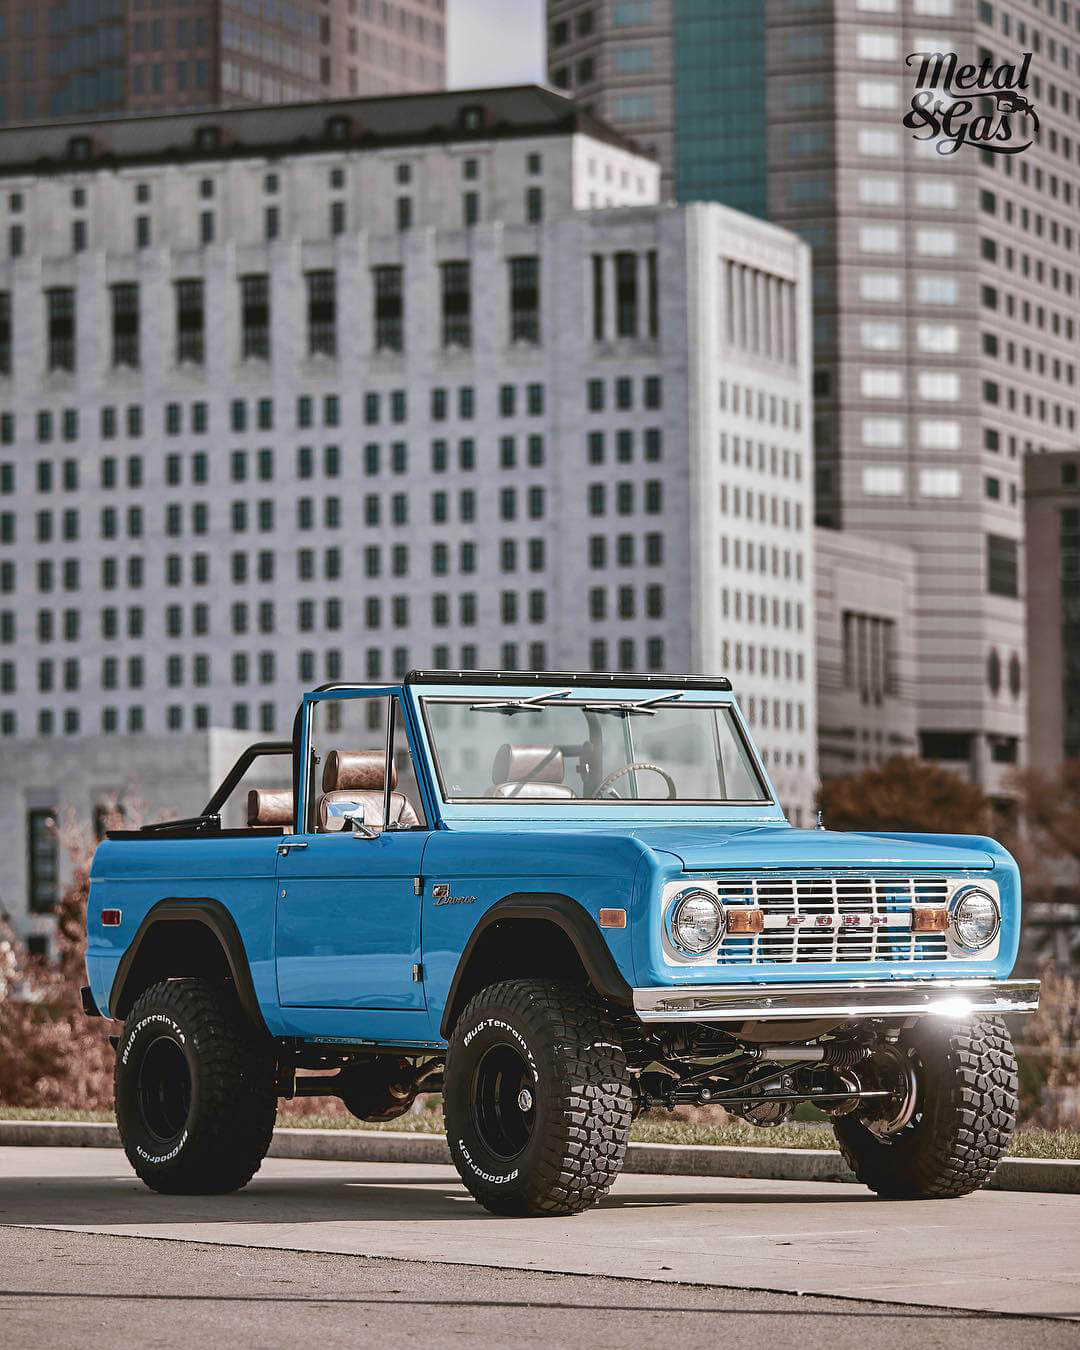 Early Bronco Lifted on 33" wheels